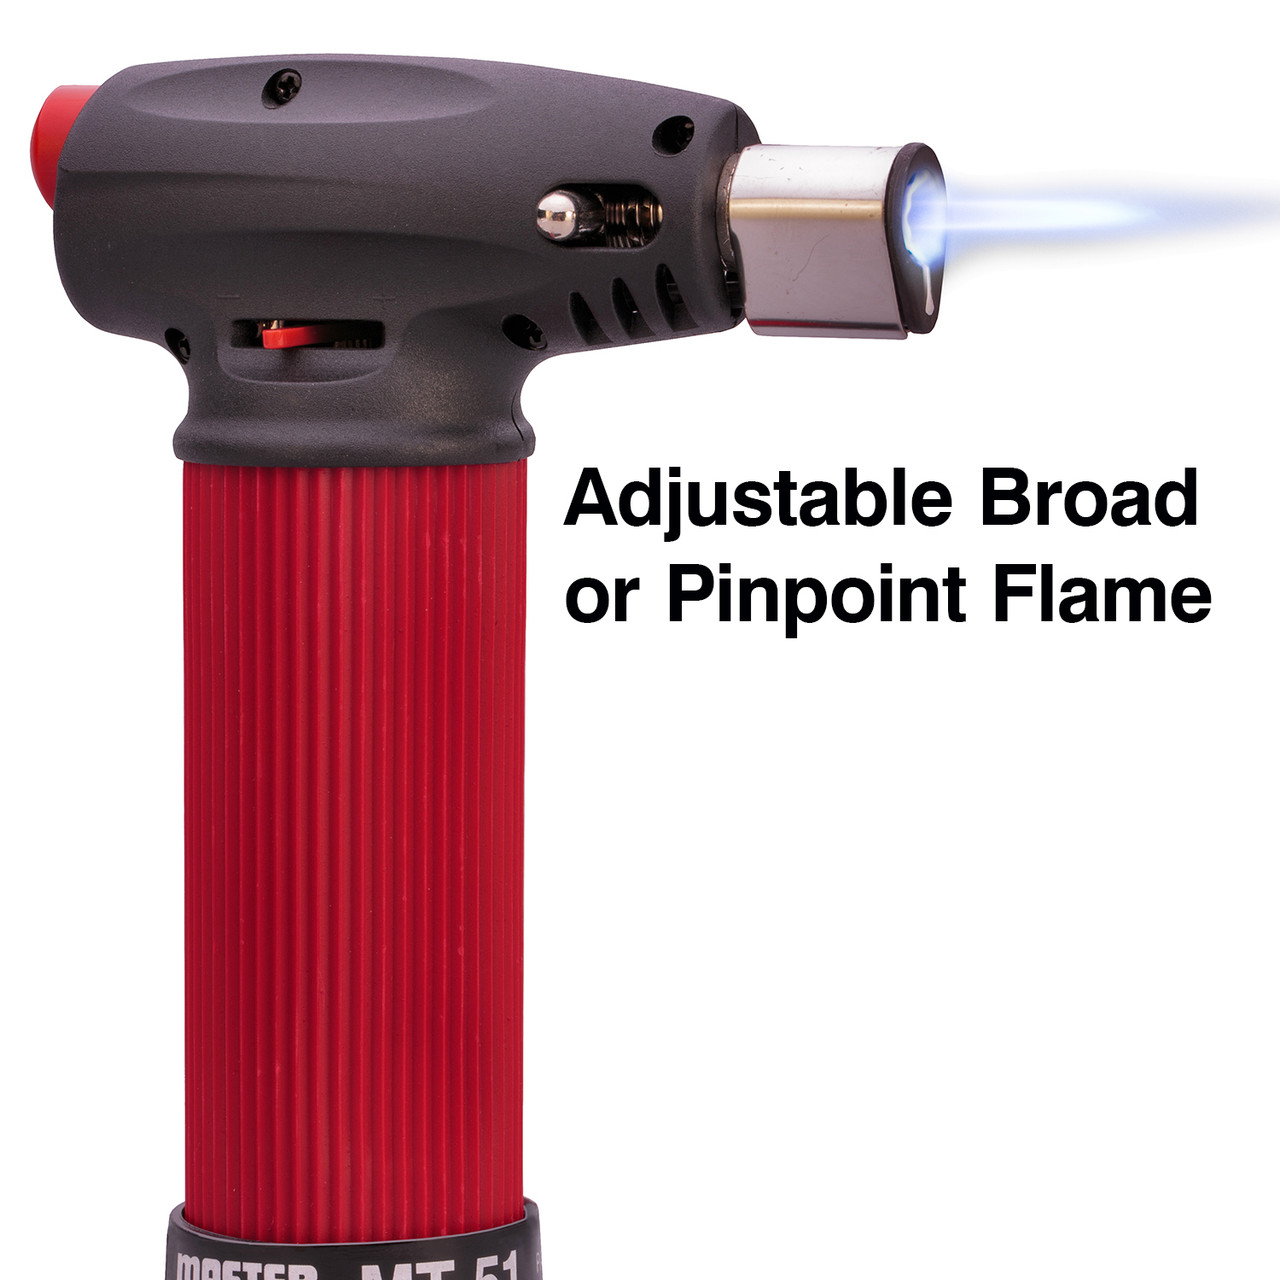 Refillable with Adjusta.. Hand Held 635705115003 Master Appliance MT-51 Butane Micro Torch